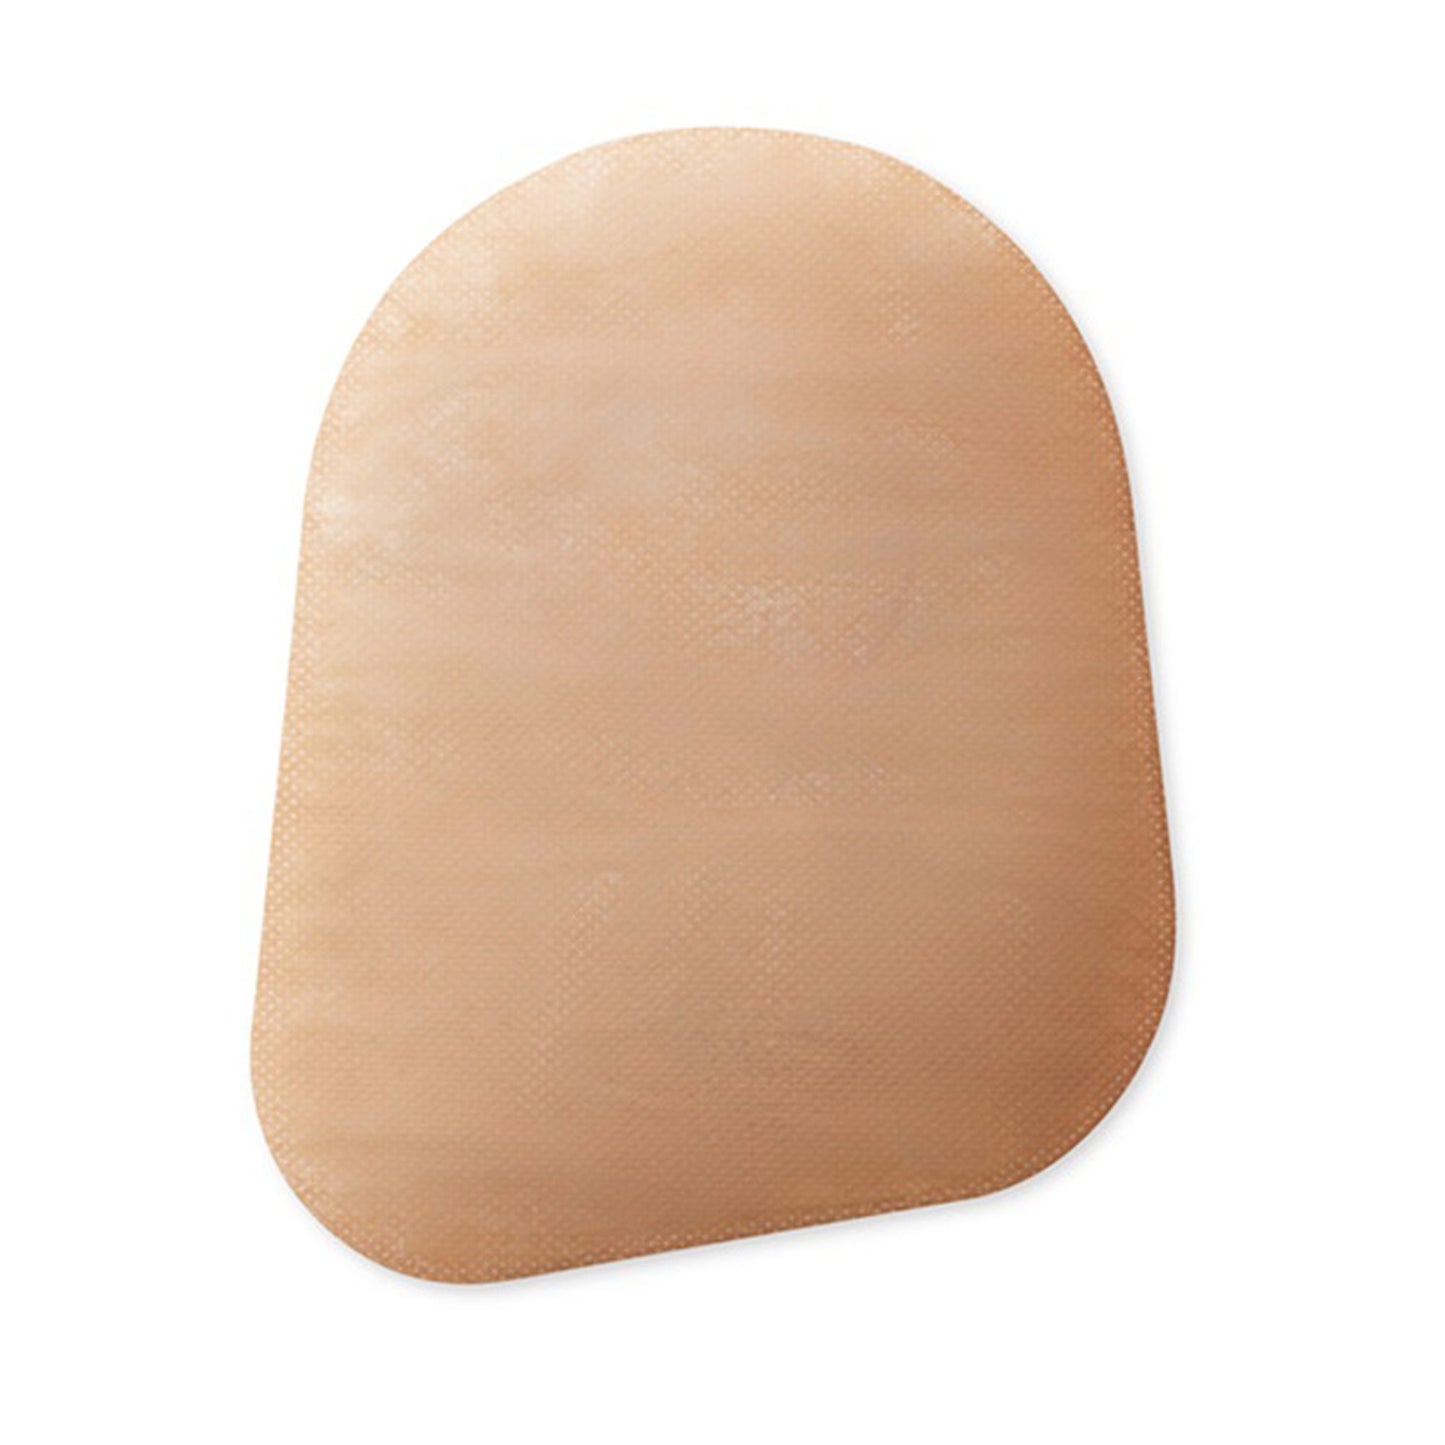 New Image™ Two-Piece Closed End Beige Ostomy Pouch, 9 Inch Length, 1.75 Inch Flange, 60 ct